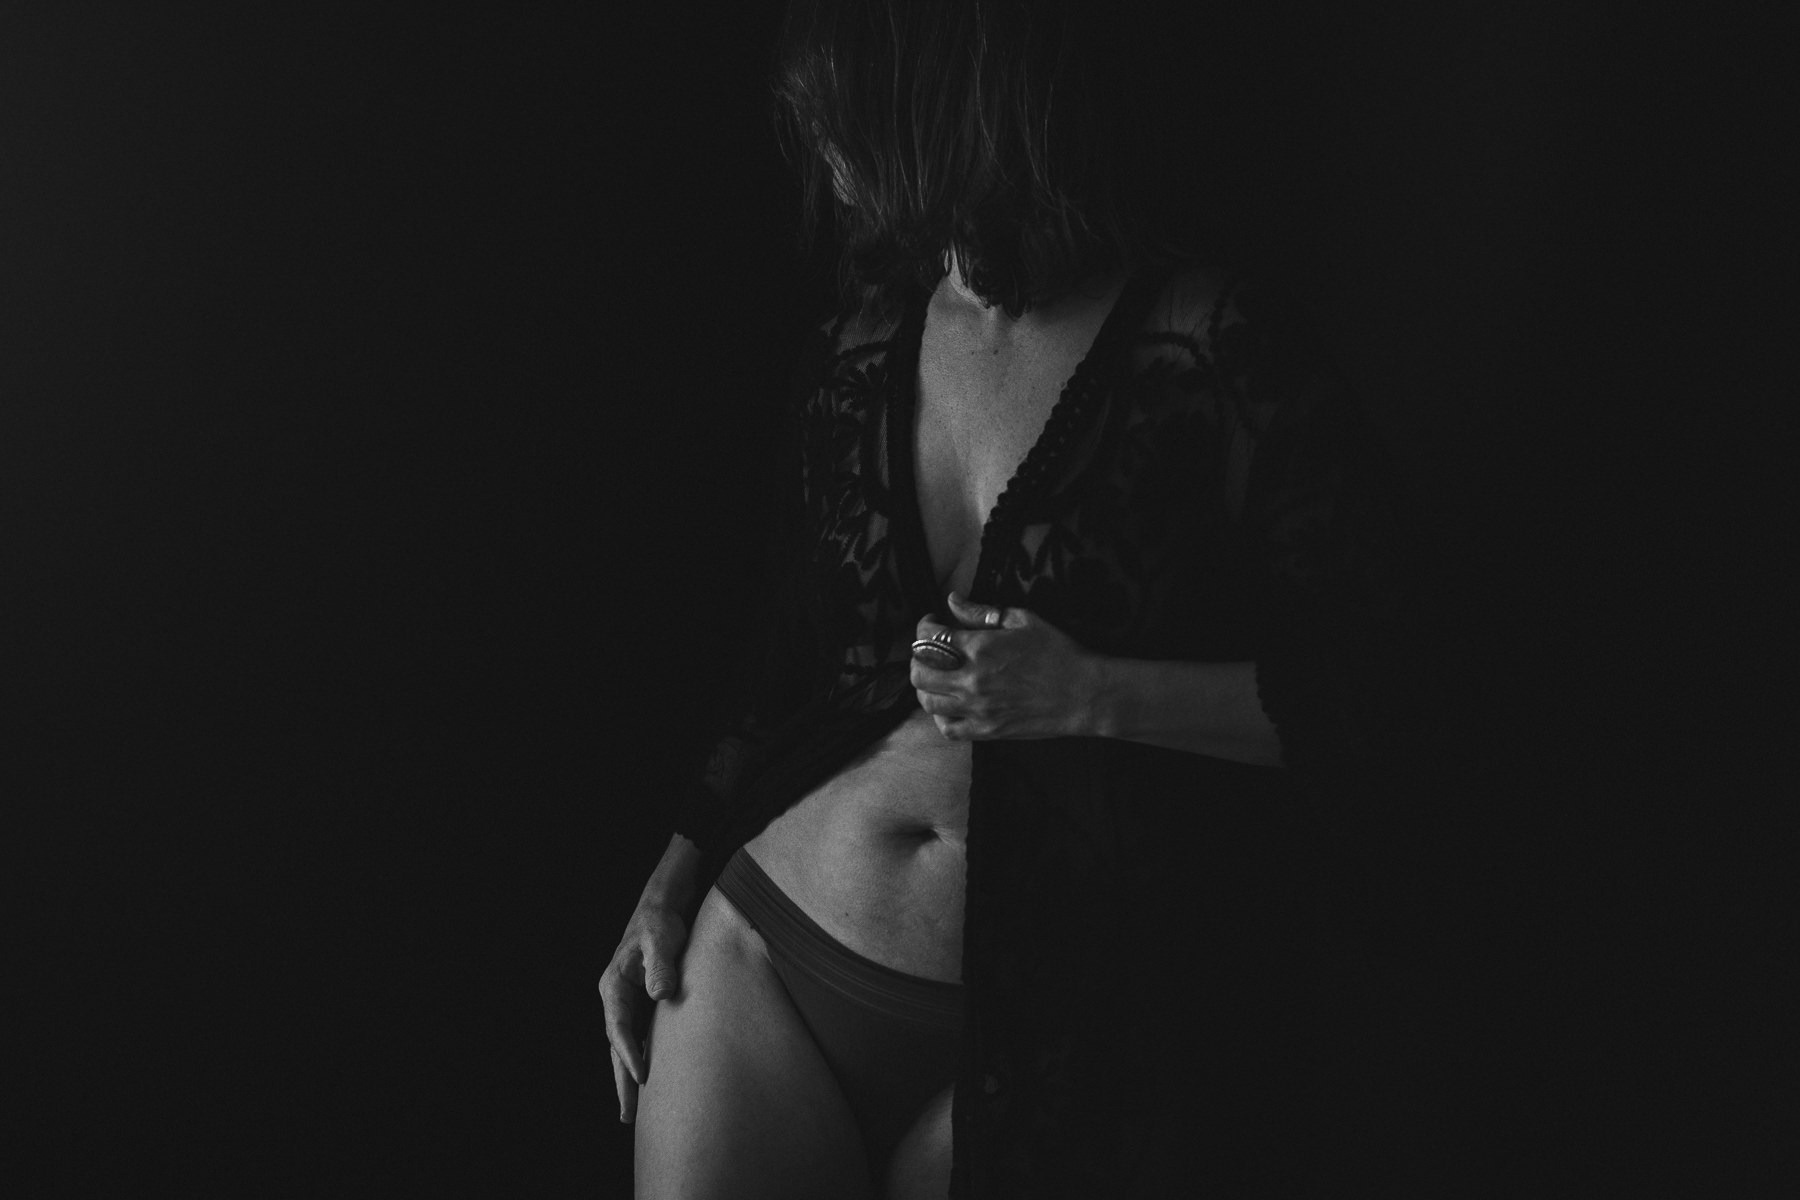 Black and white boudoir photograph of a faceless woman in a lace robe held together under her breasts with one hand and other hand on her hip over underwear